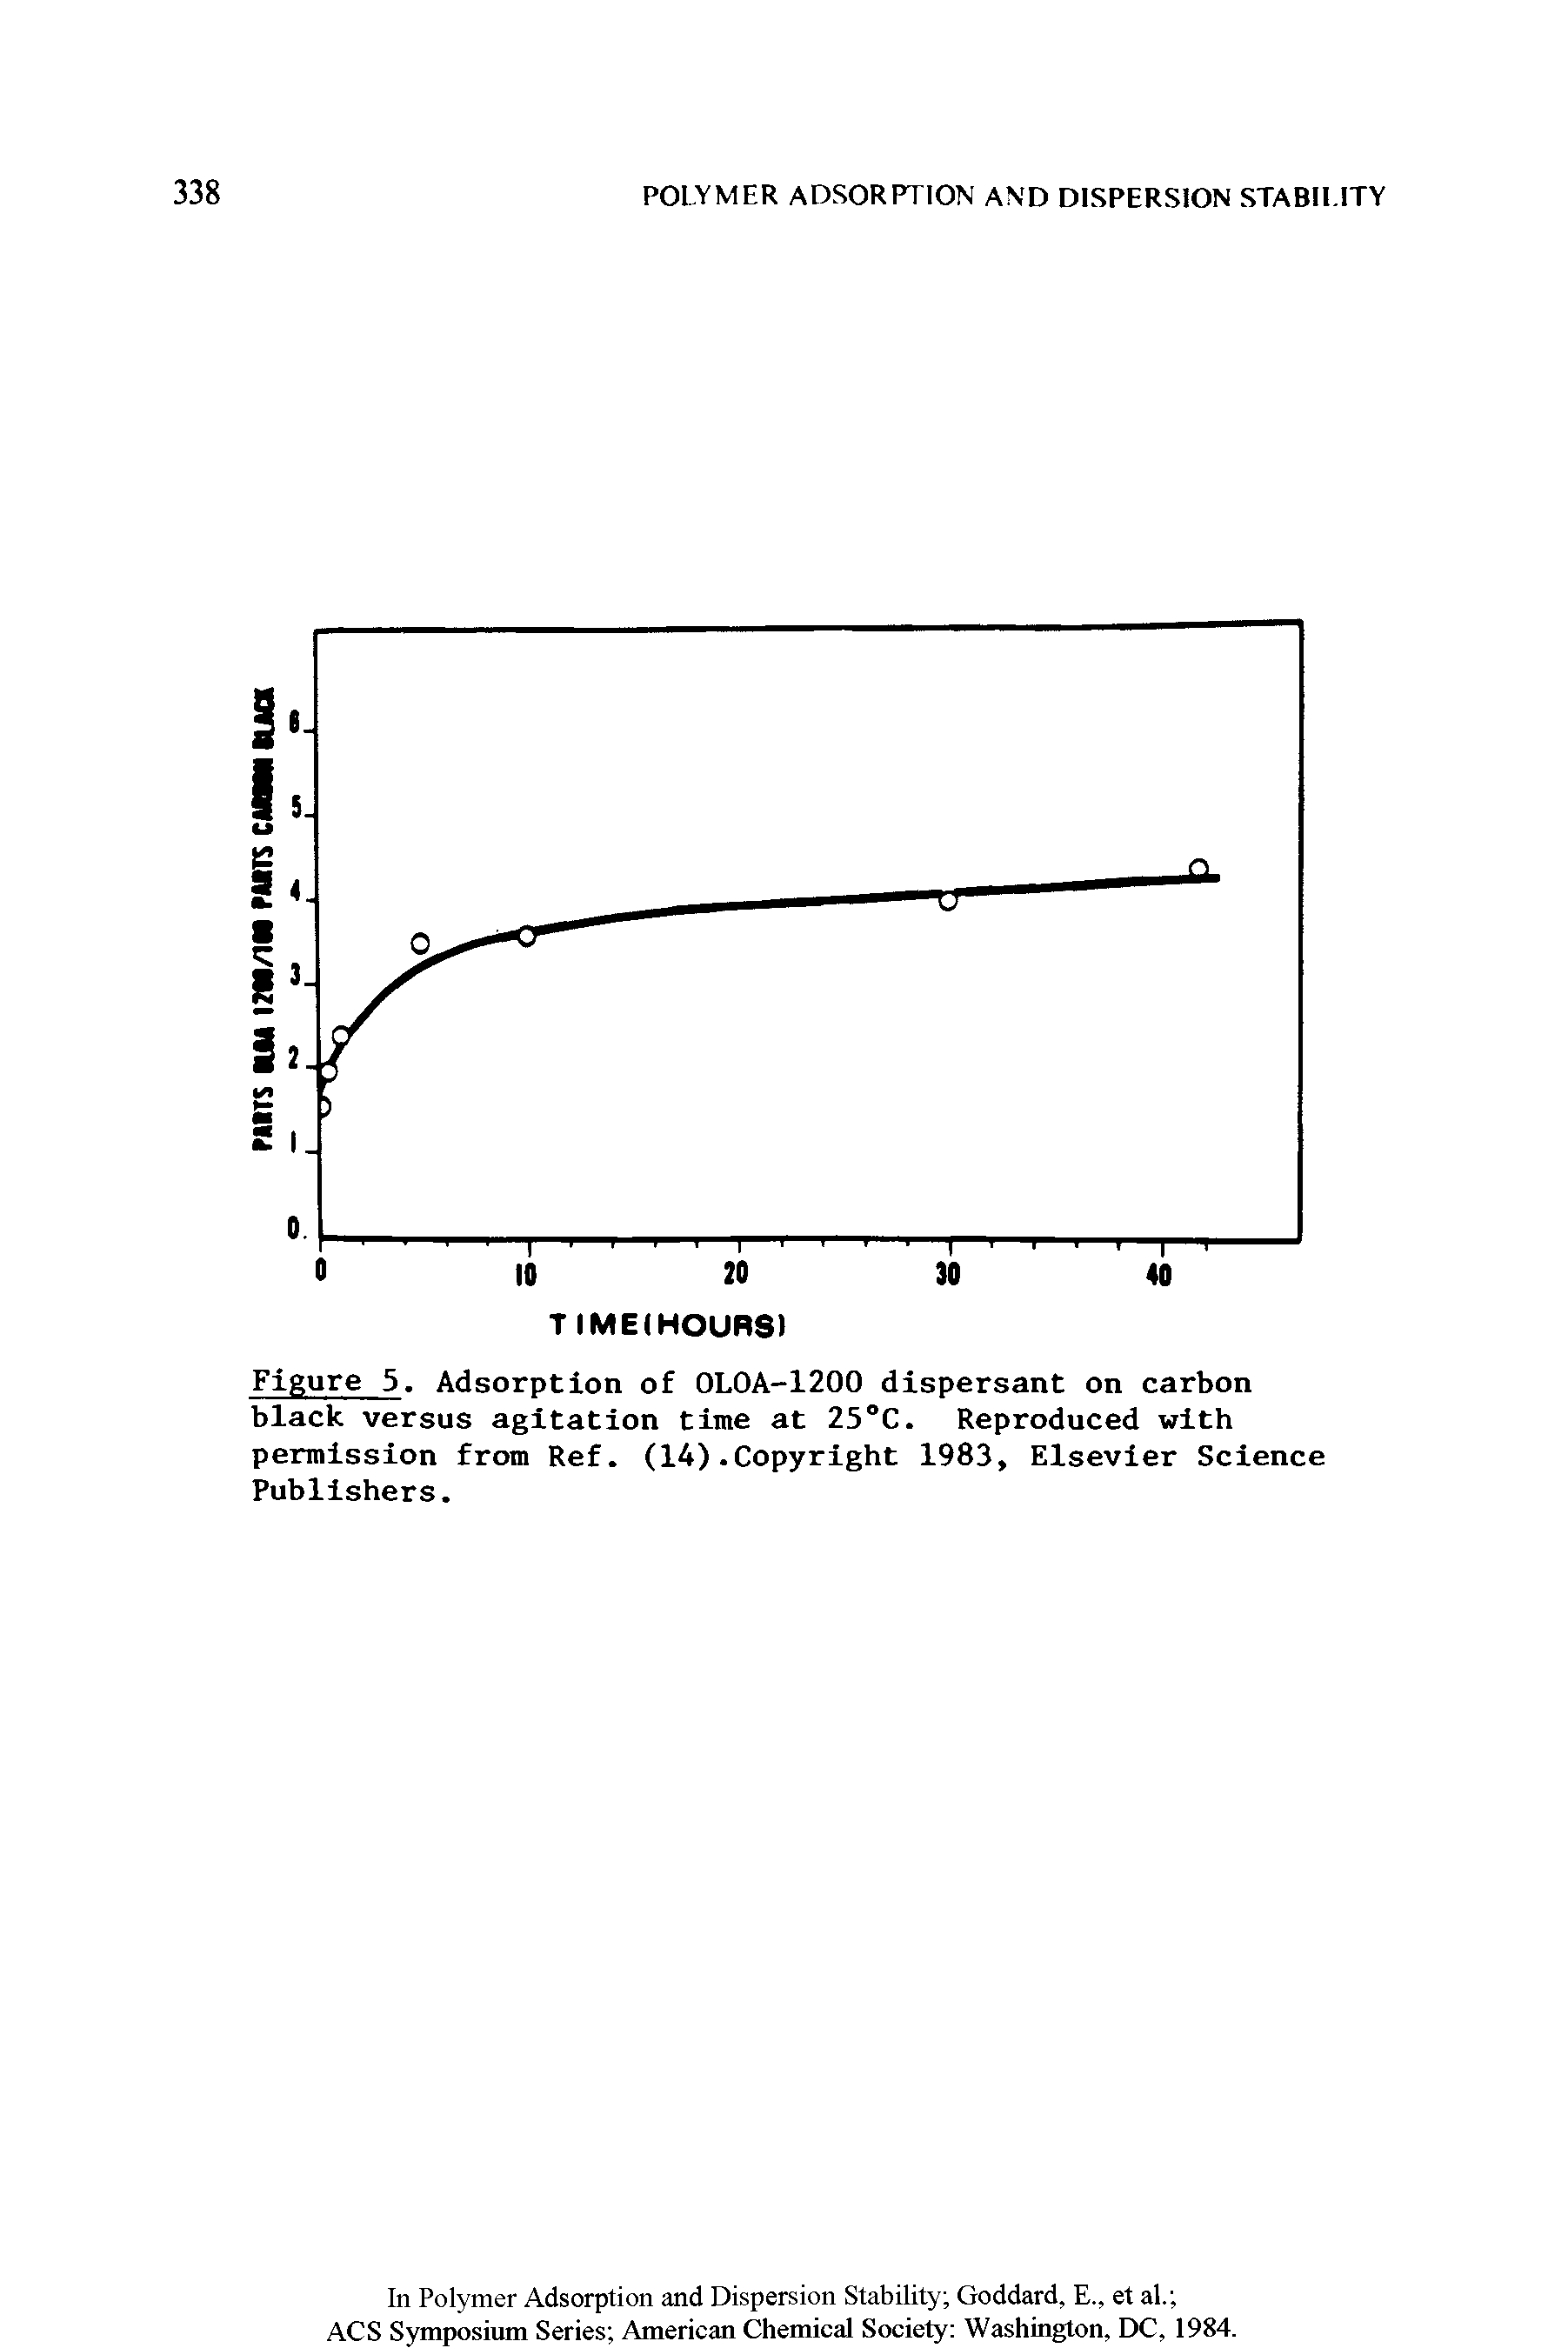 Figure 5. Adsorption of 0L0A-1200 dispersant on carbon black versus agitation time at 25°C. Reproduced with permission from Ref. (14).Copyright 1983, Elsevier Science Publishers.